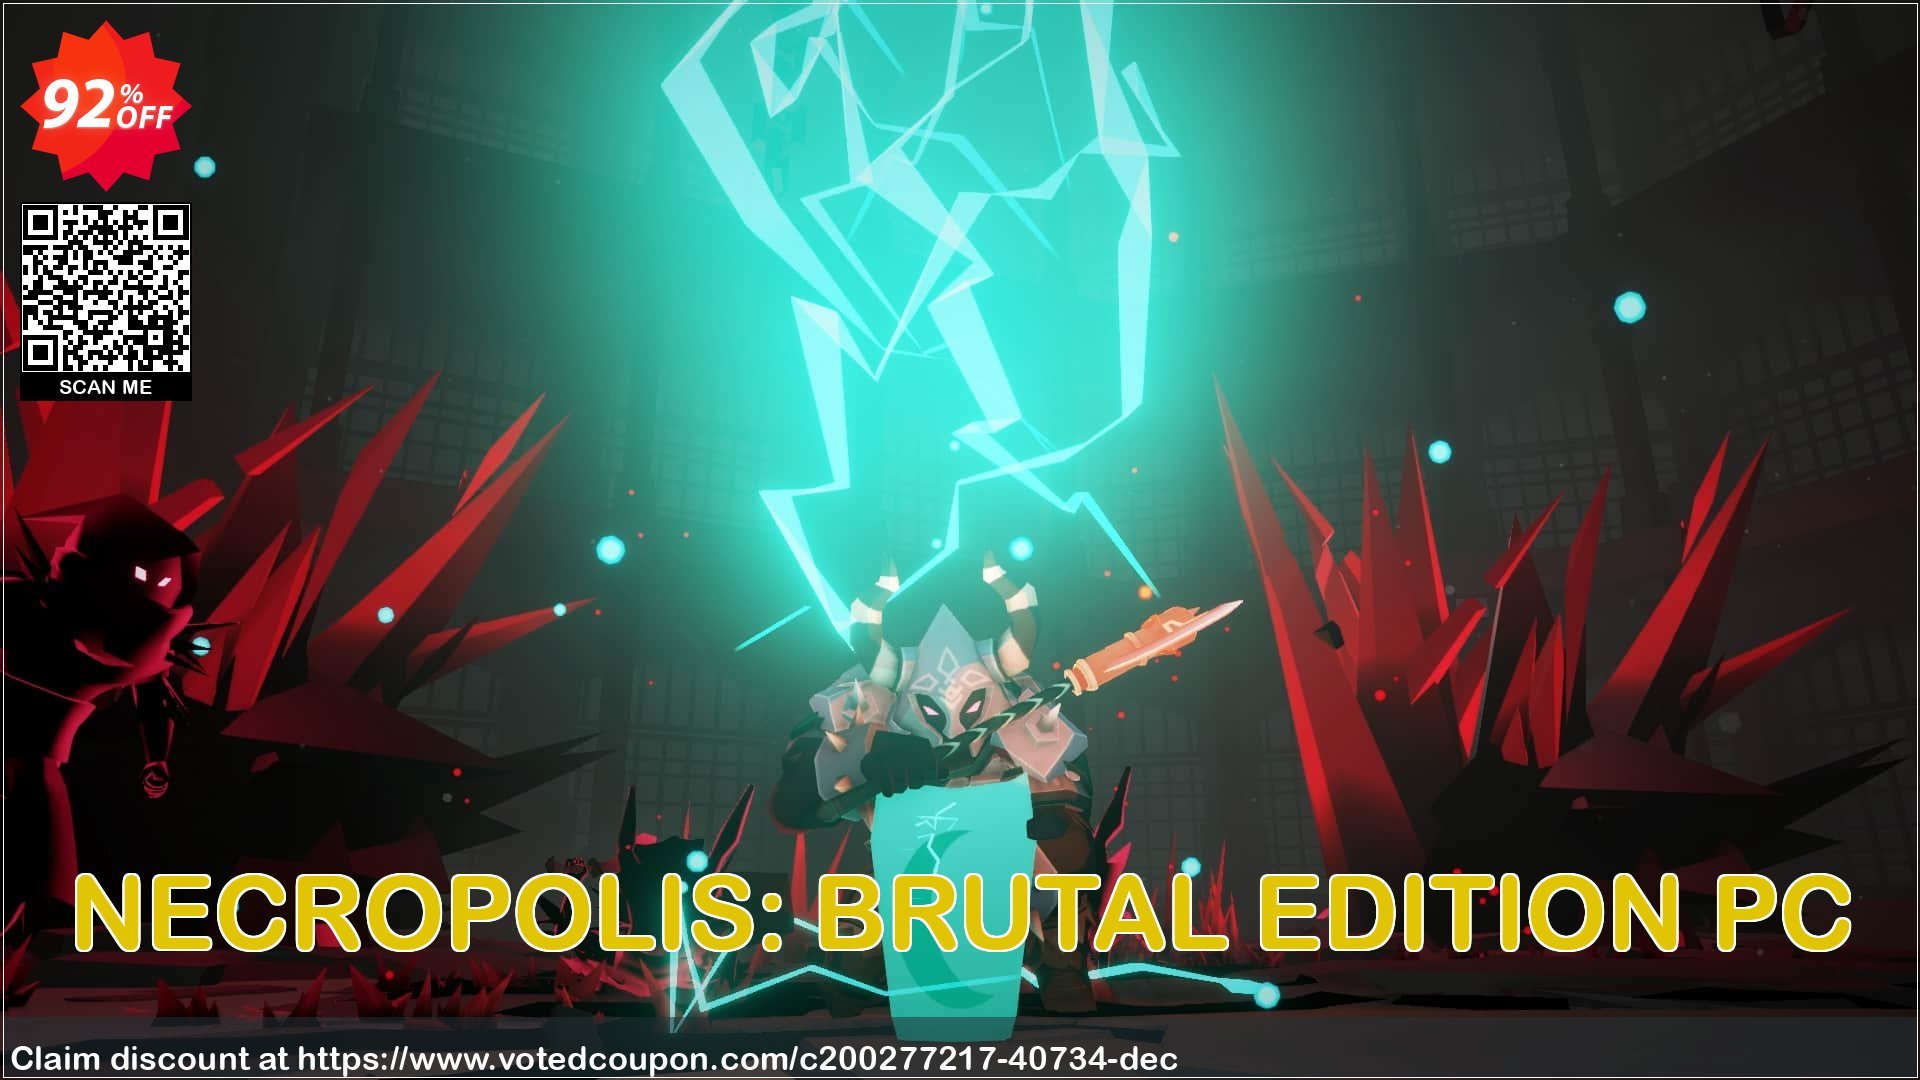 NECROPOLIS: BRUTAL EDITION PC Coupon Code May 2024, 92% OFF - VotedCoupon